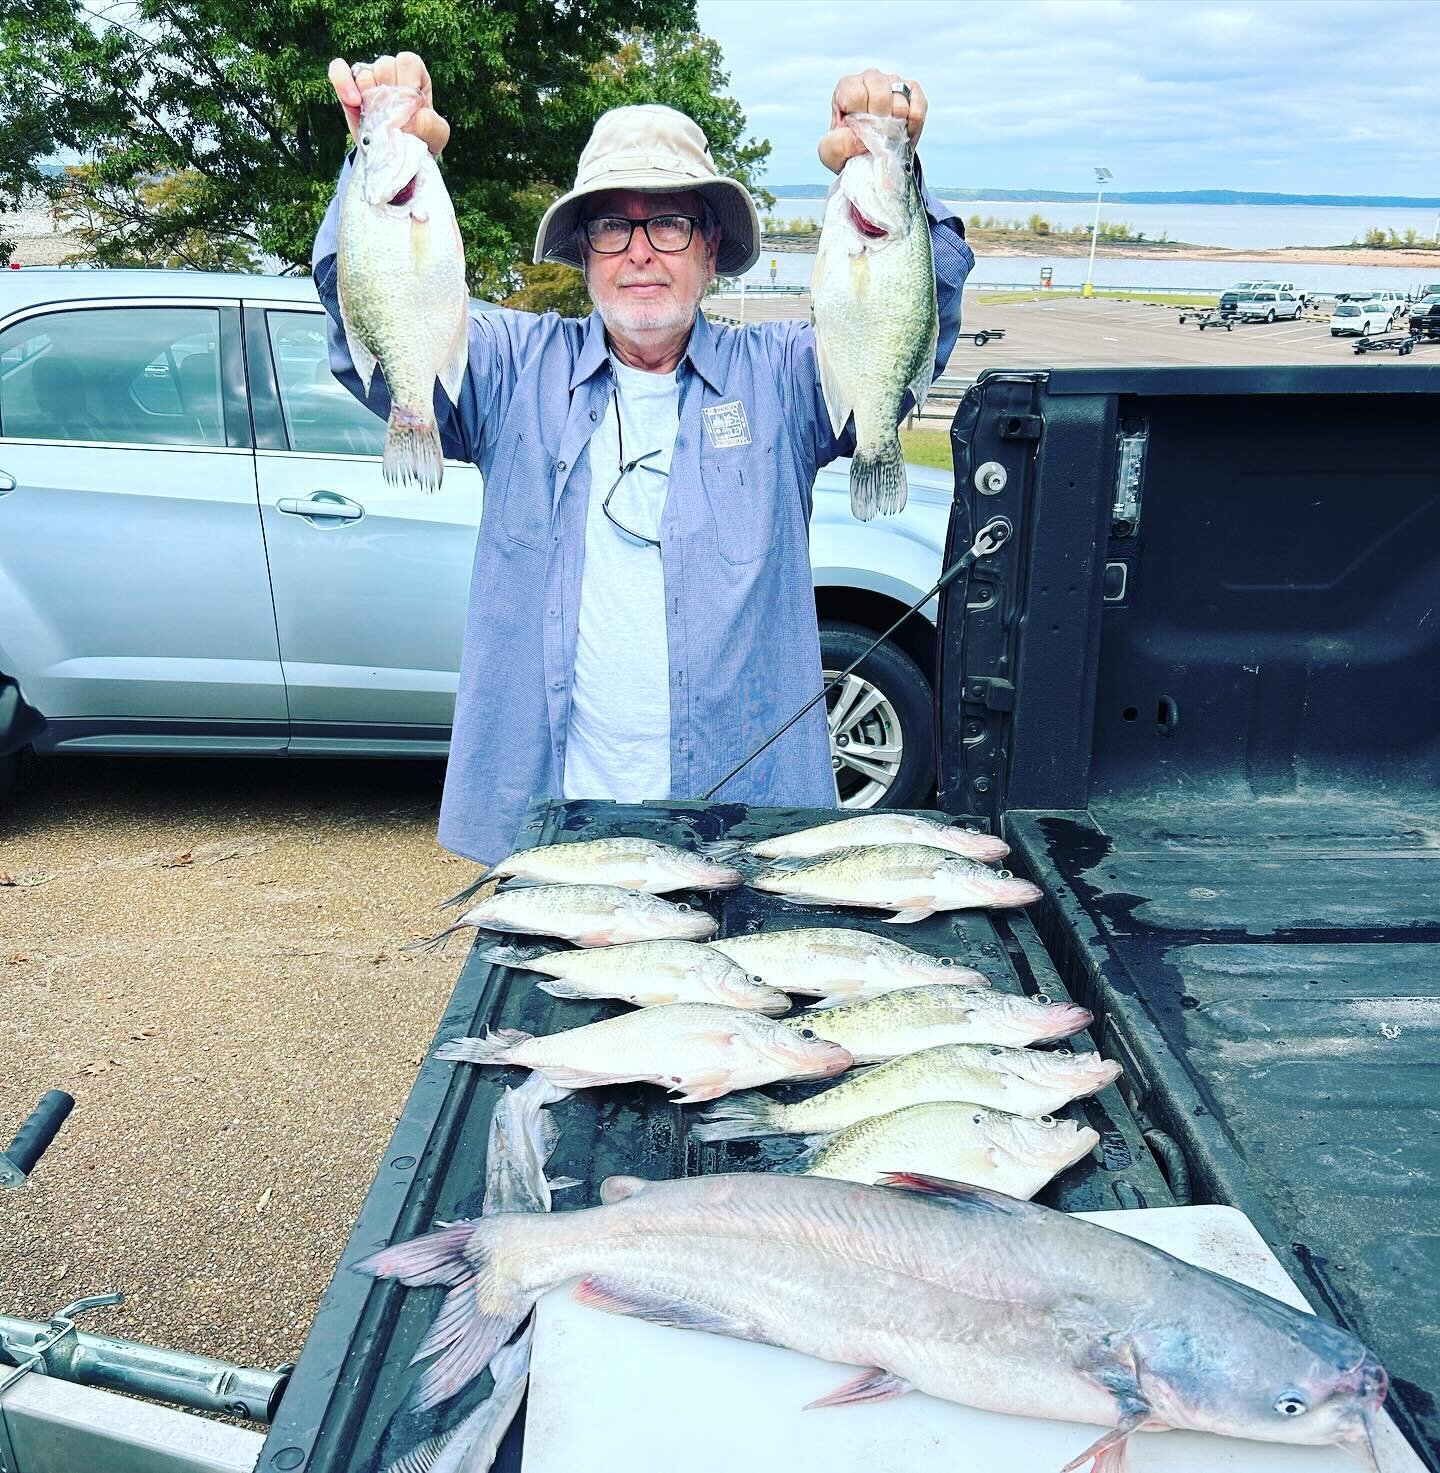 Tim with some nice fall slabs on a trip with JW and Capt. Shayne yesterday. Wind is supposed to blow like a freight train today but looking forward to the challenge! Book your trip before we leave for Iowa and get free admission to the Pumpkin Patch 